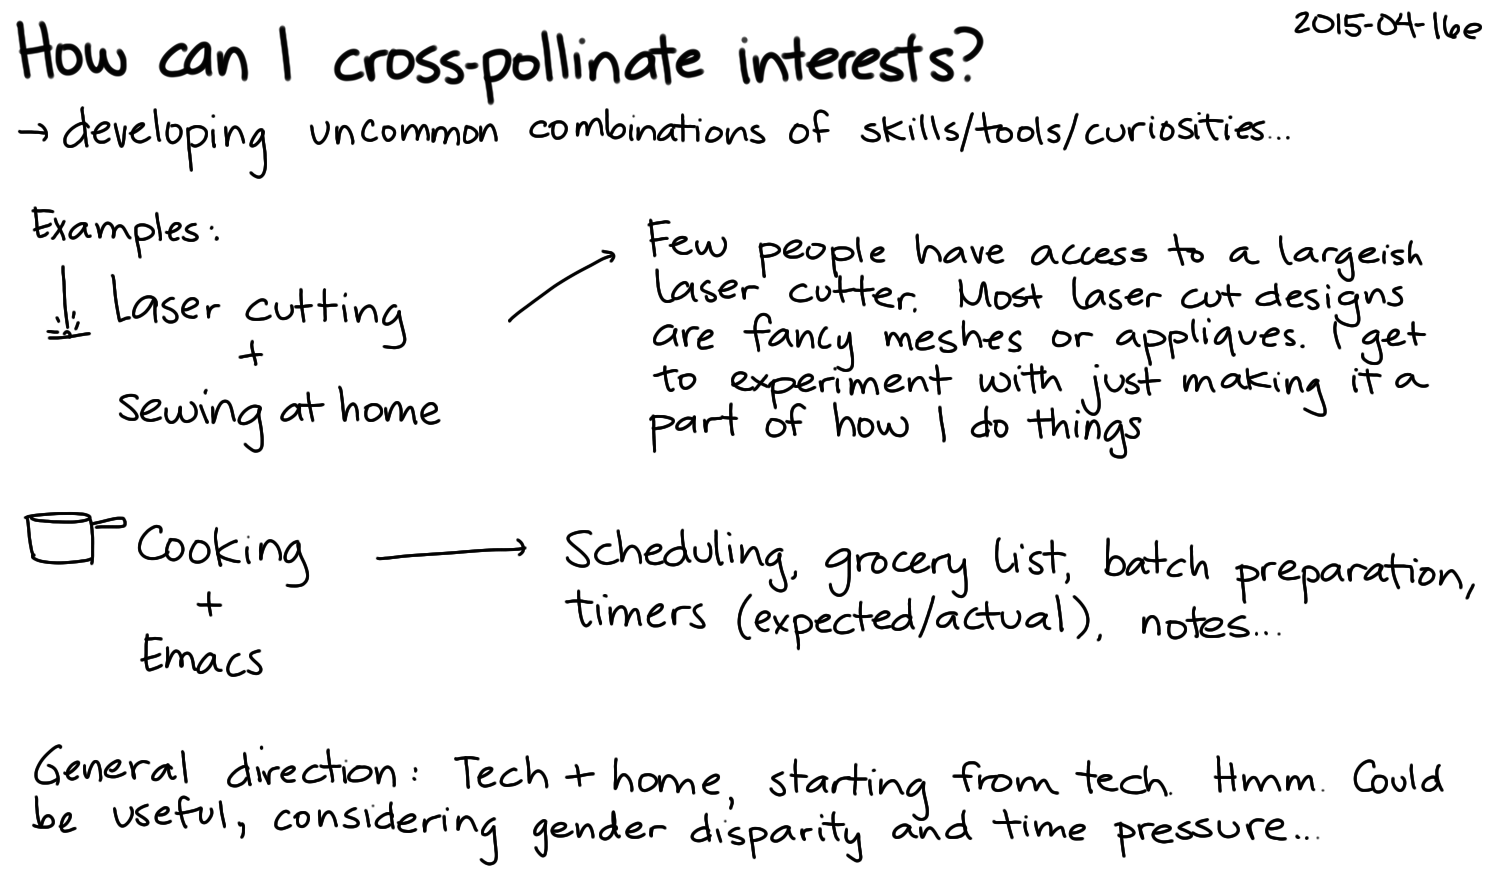 2015-04-16e How can I cross-pollinate interests.png